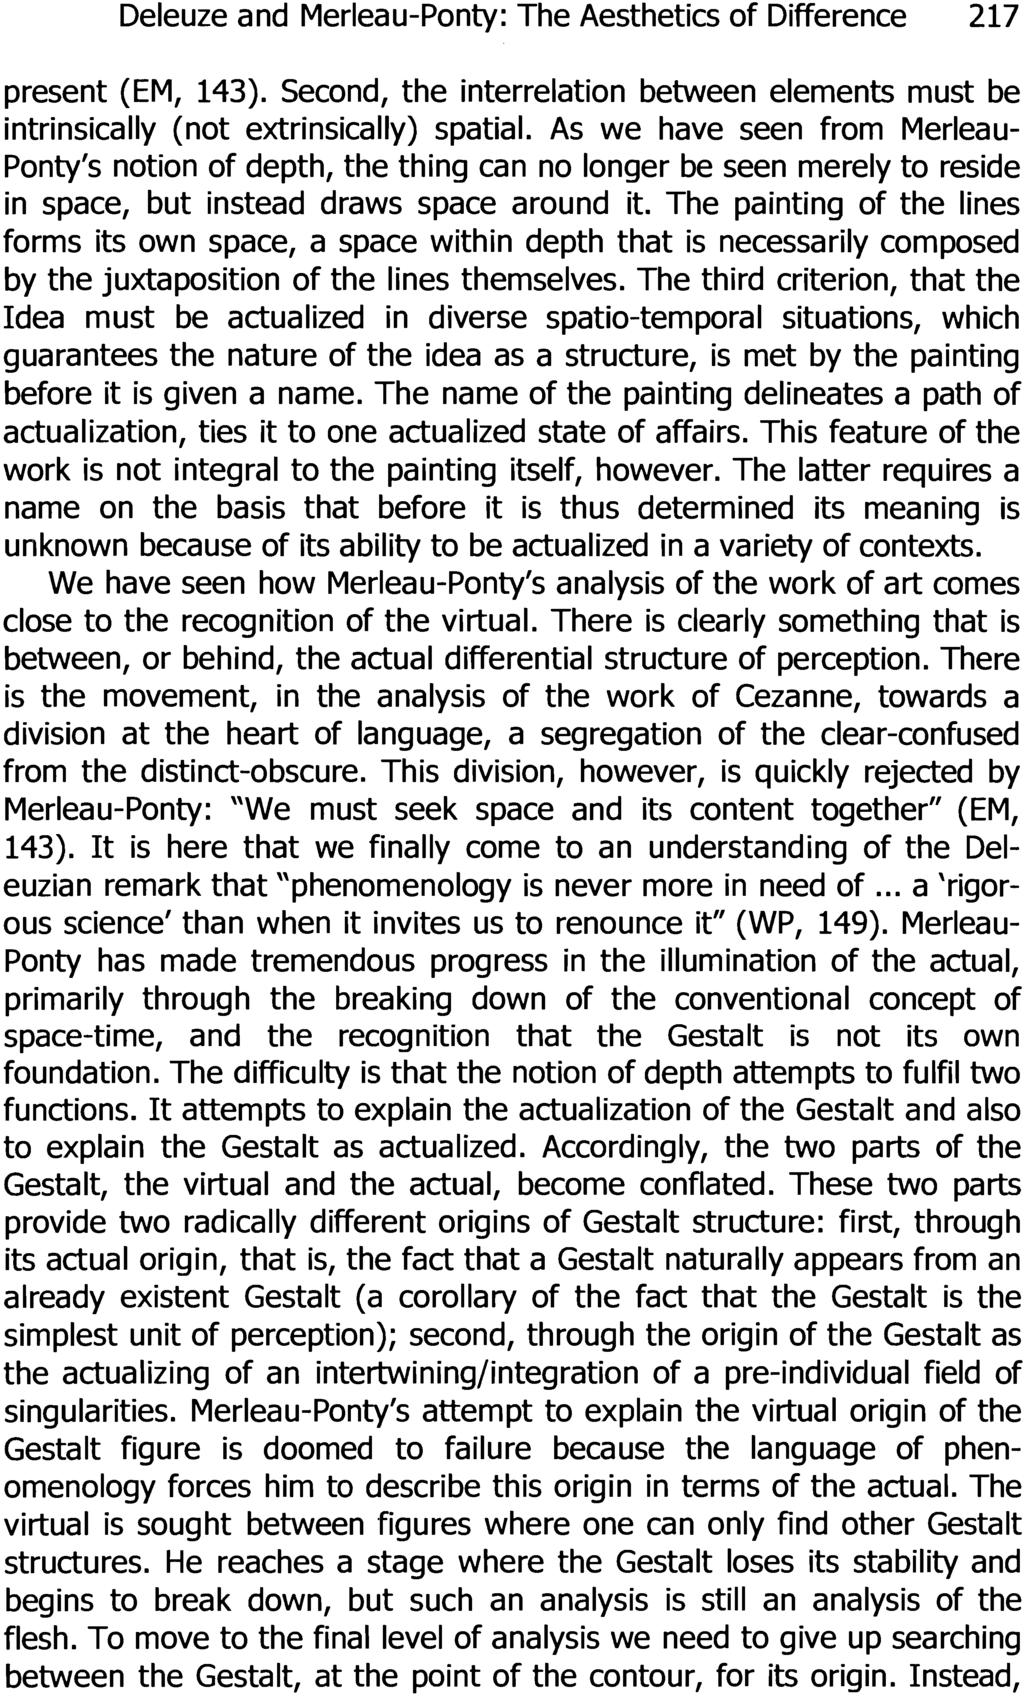 Deleuze and Merleau-Ponty: The Aesthetics of Difference 217 present (EM, 143). Second, the interrelation between elements must be intrinsically (not extrinsically) spatial.